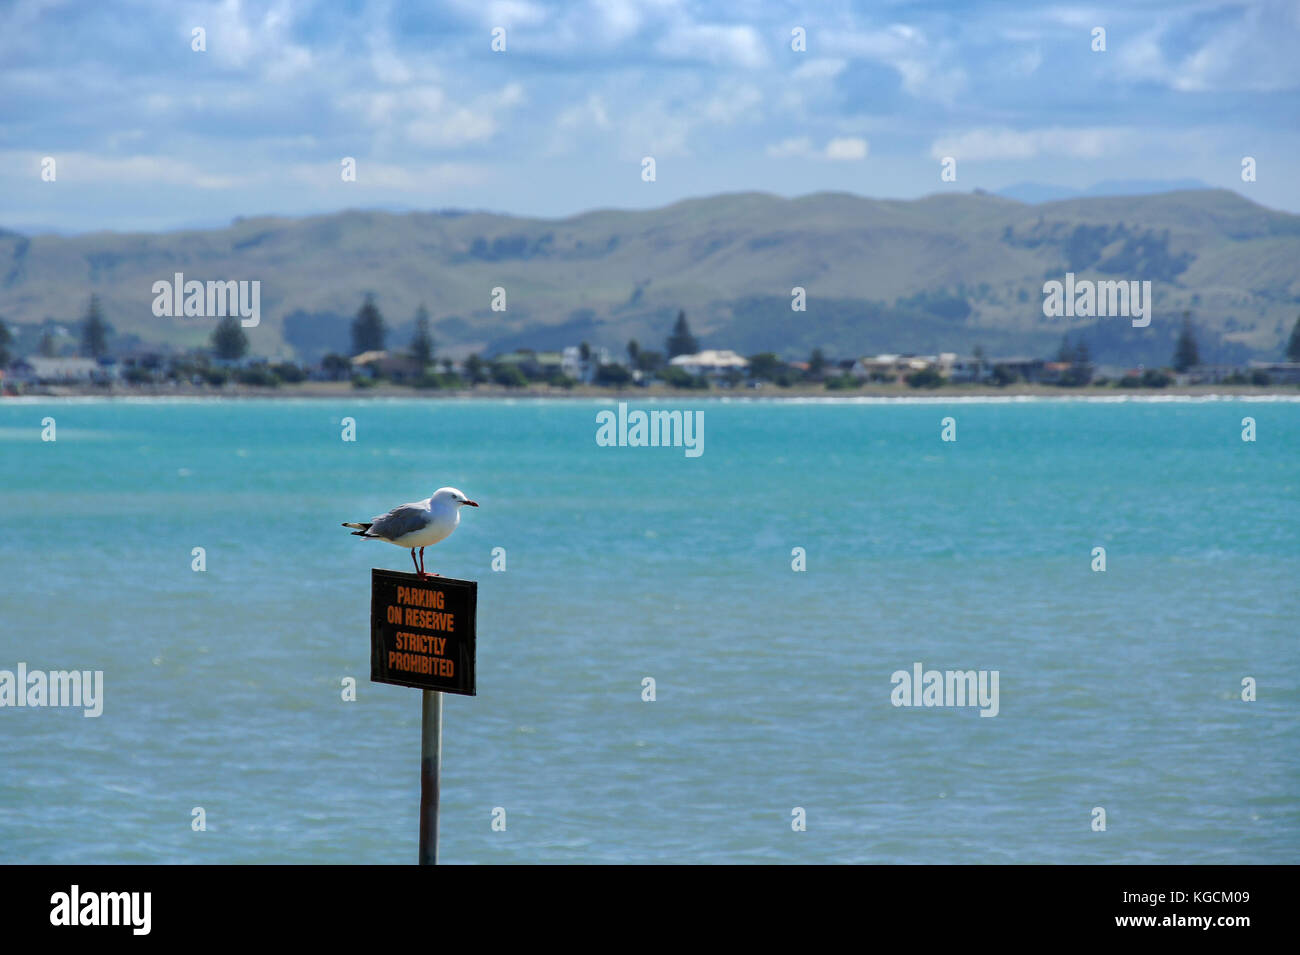 The Seagull on the 'NO PARKING' Sign by the Sea Stock Photo